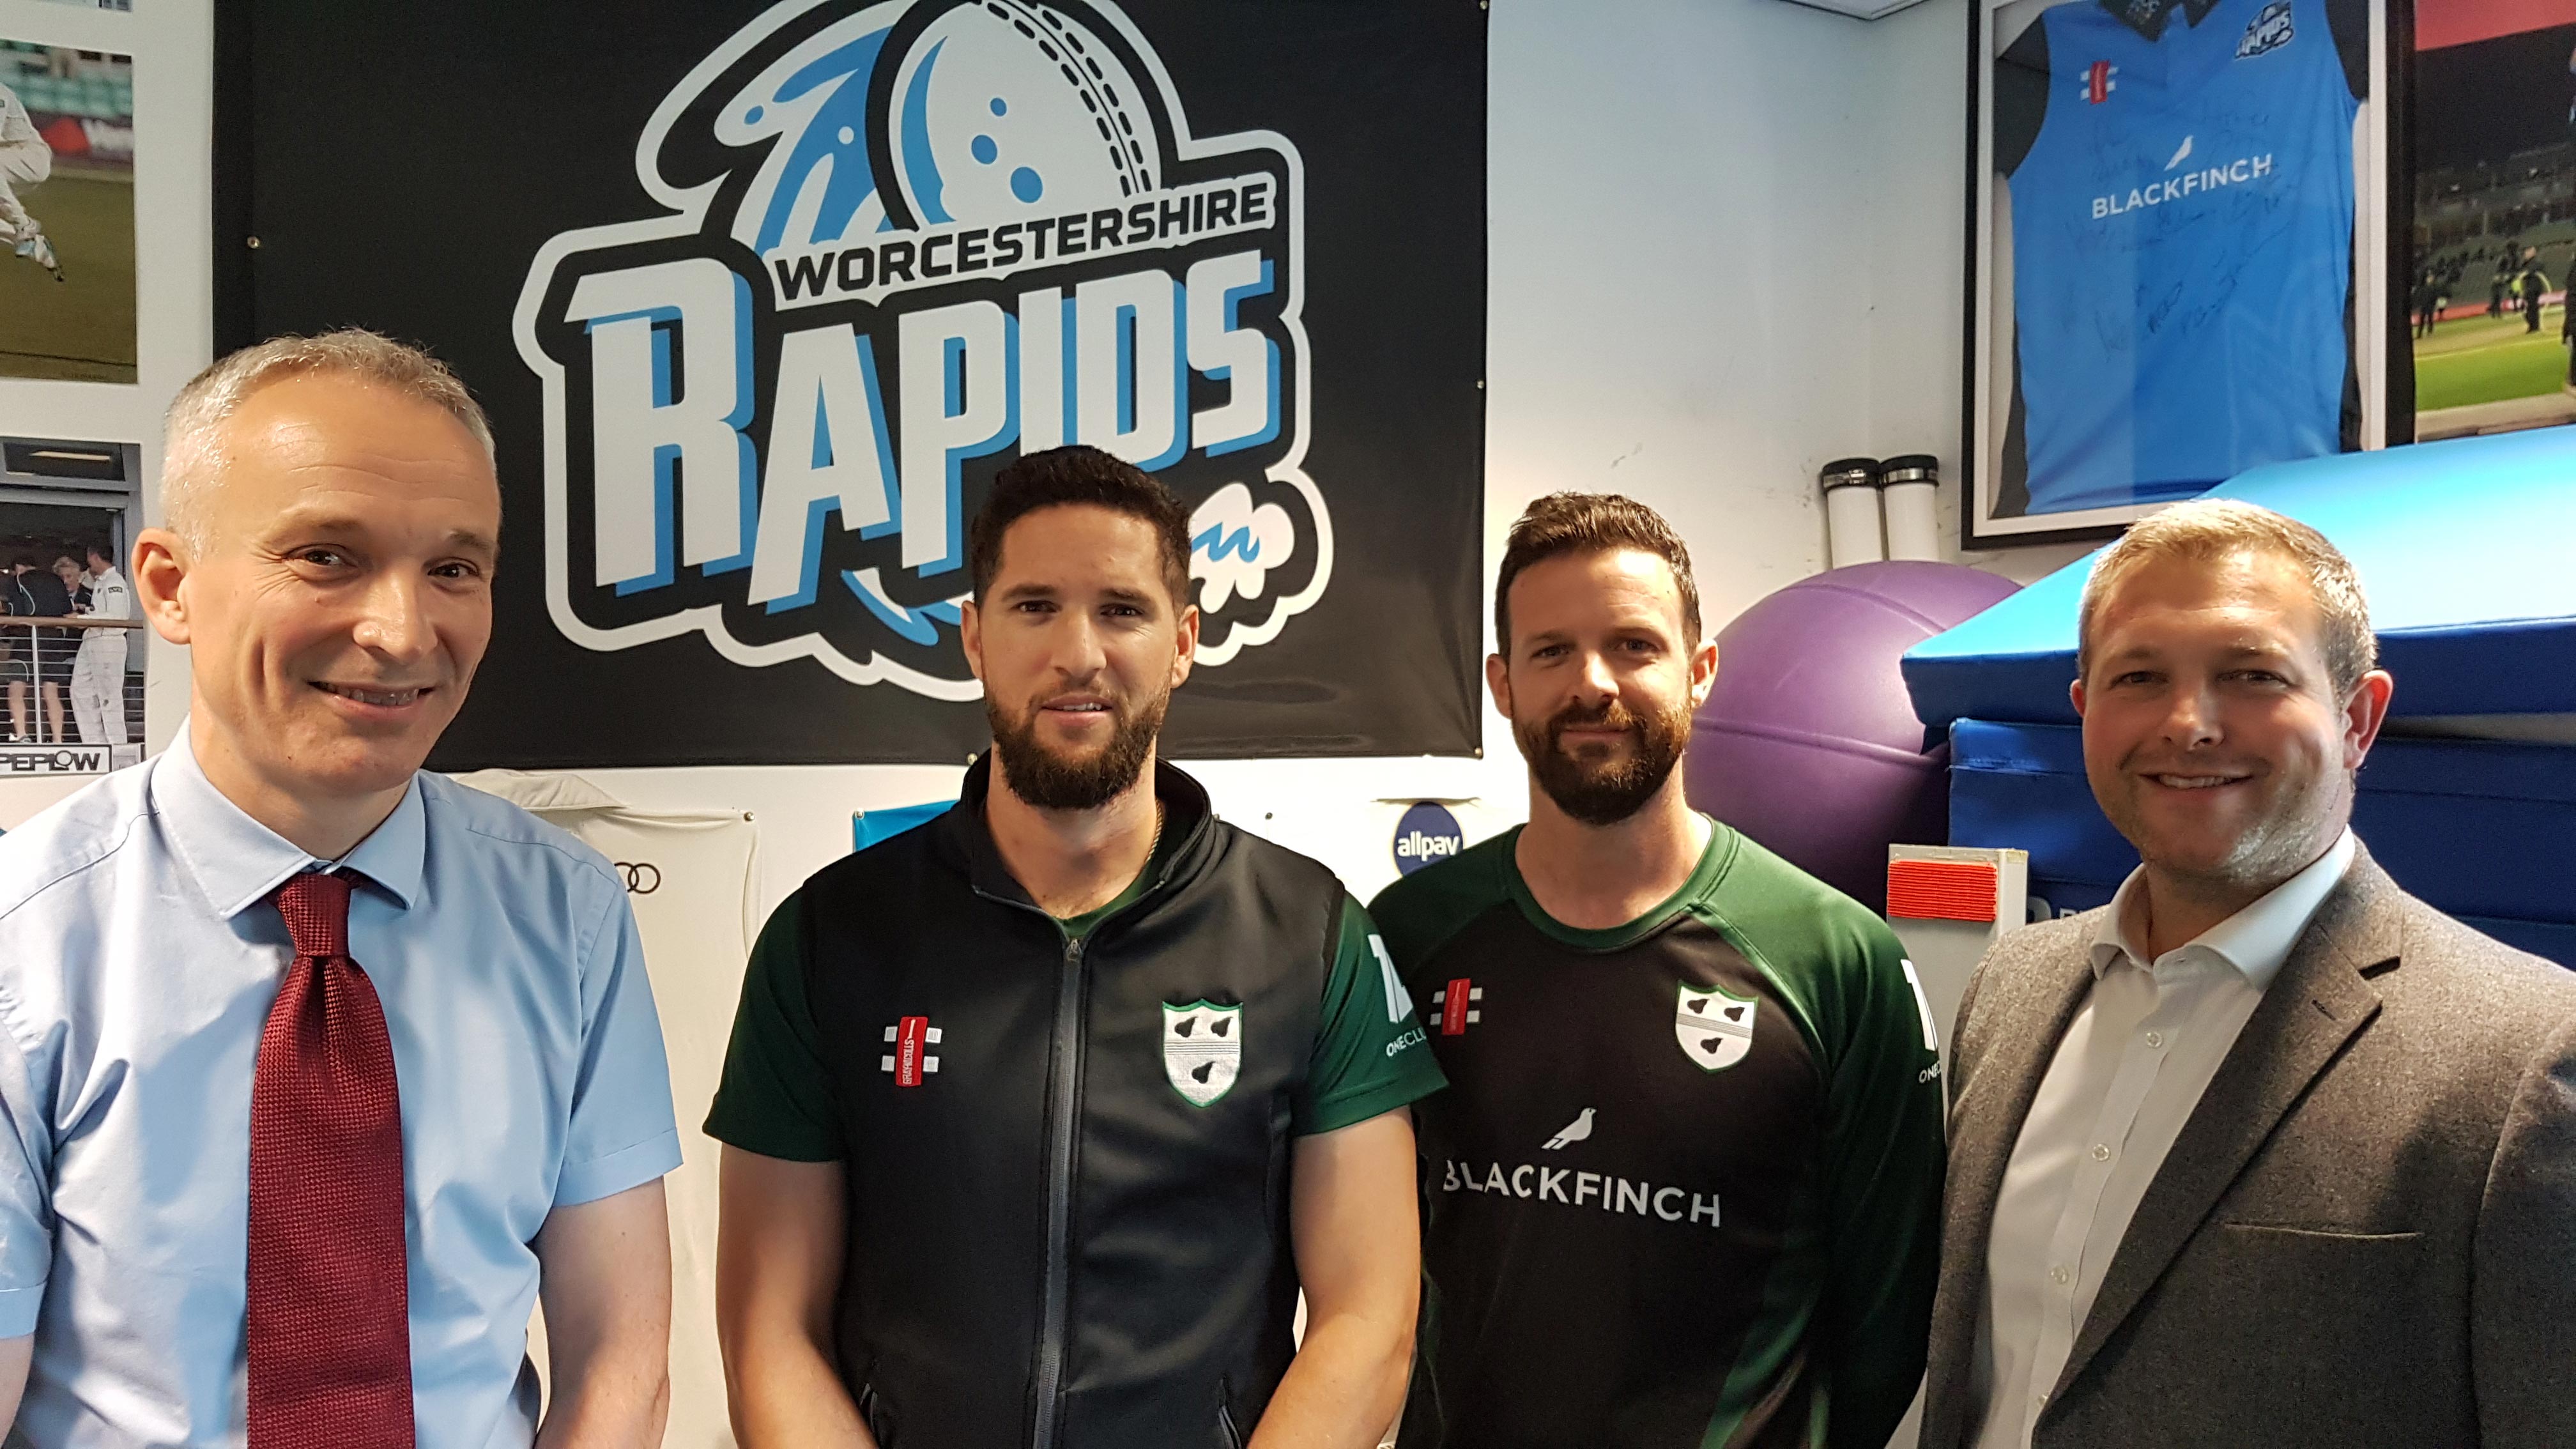 Skin cancer screening for Worcestershire CCC players